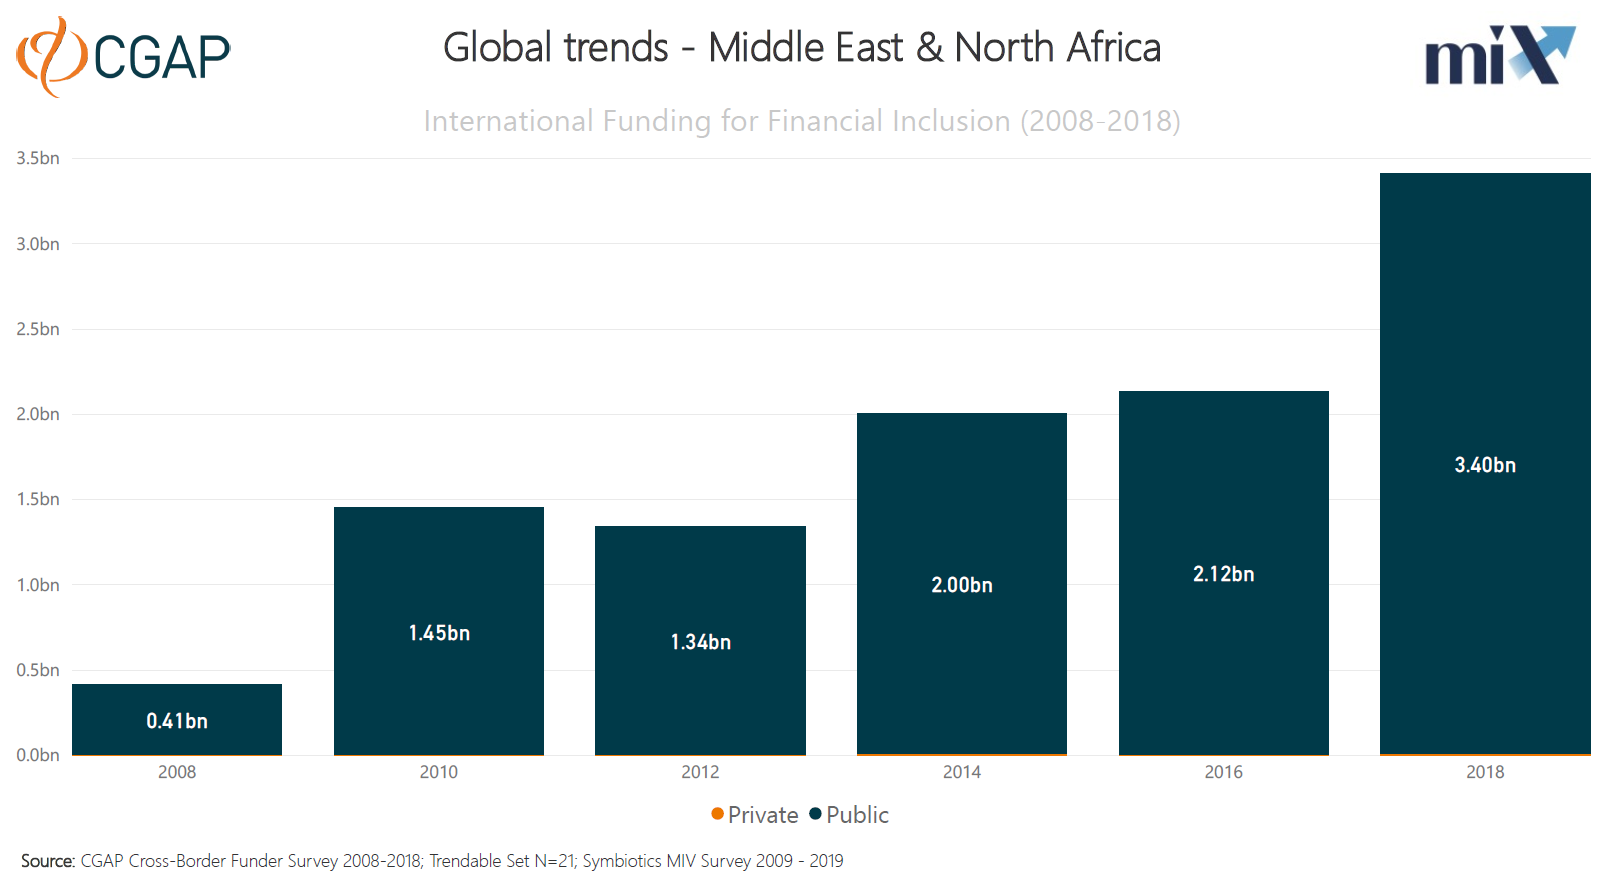 How much international funding is going to support financial inclusion in Middle East and North Africa?